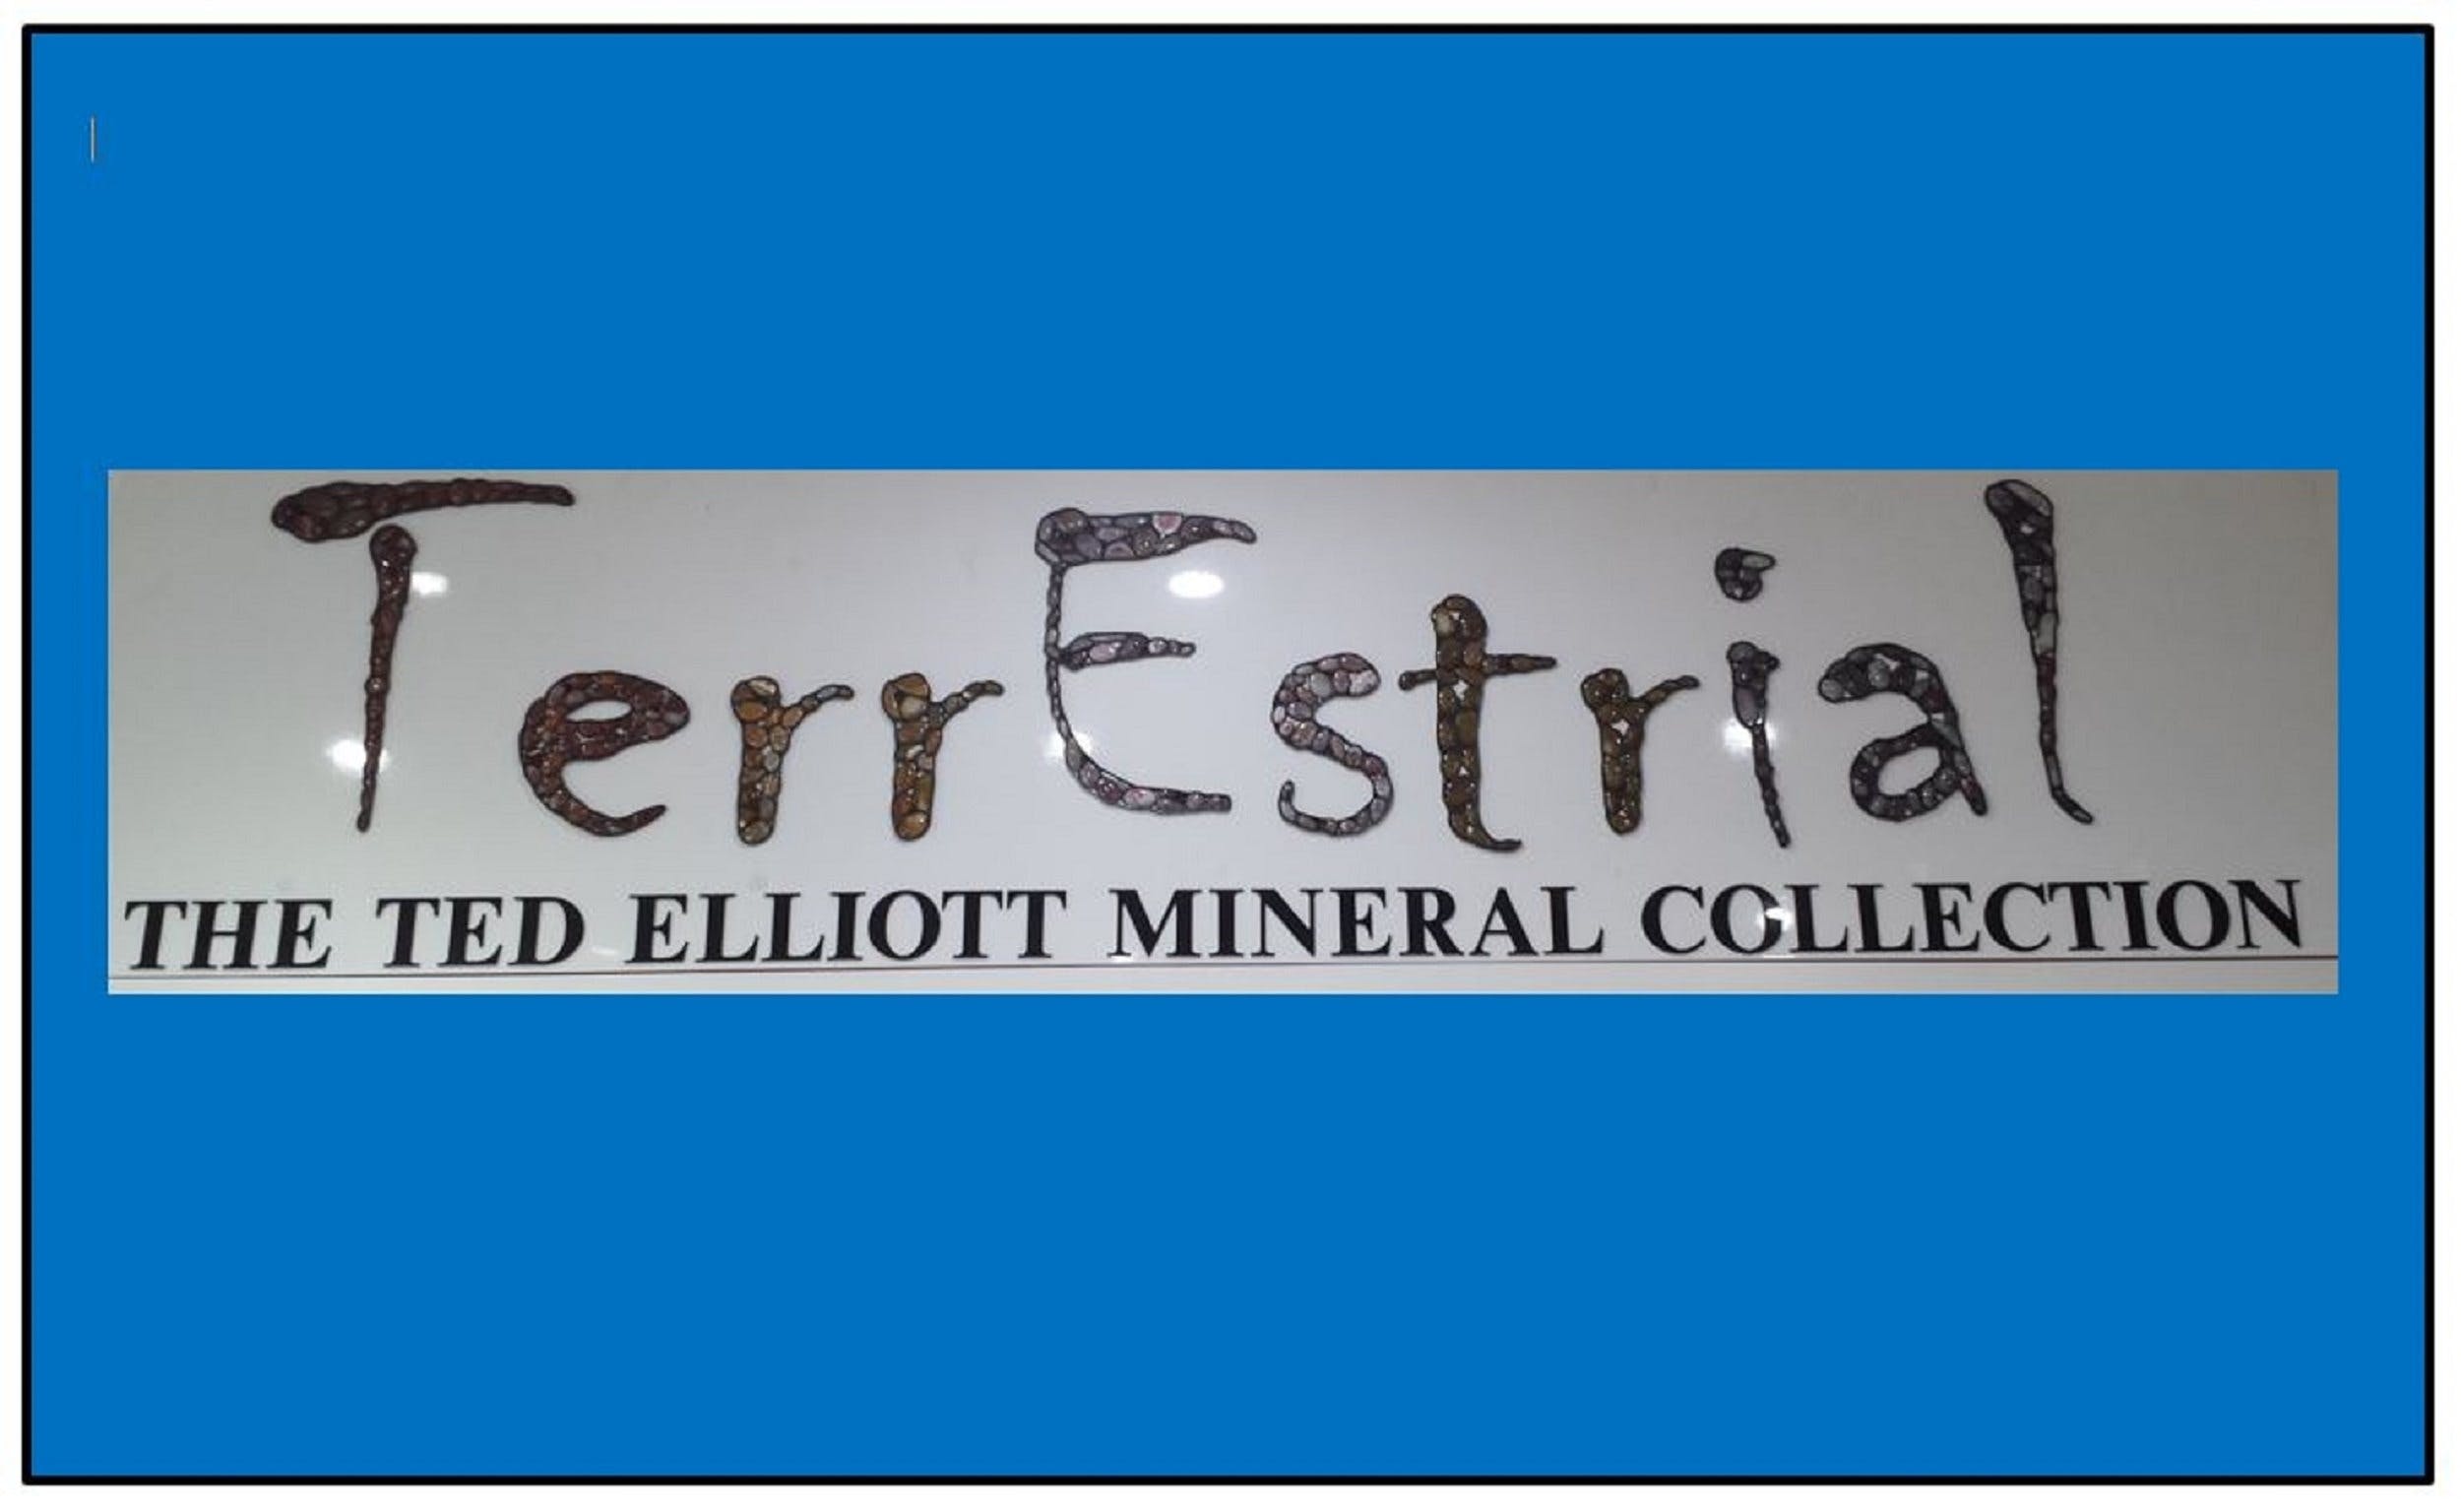 The Ted Elliott Mineral Collection - Tourism Adelaide